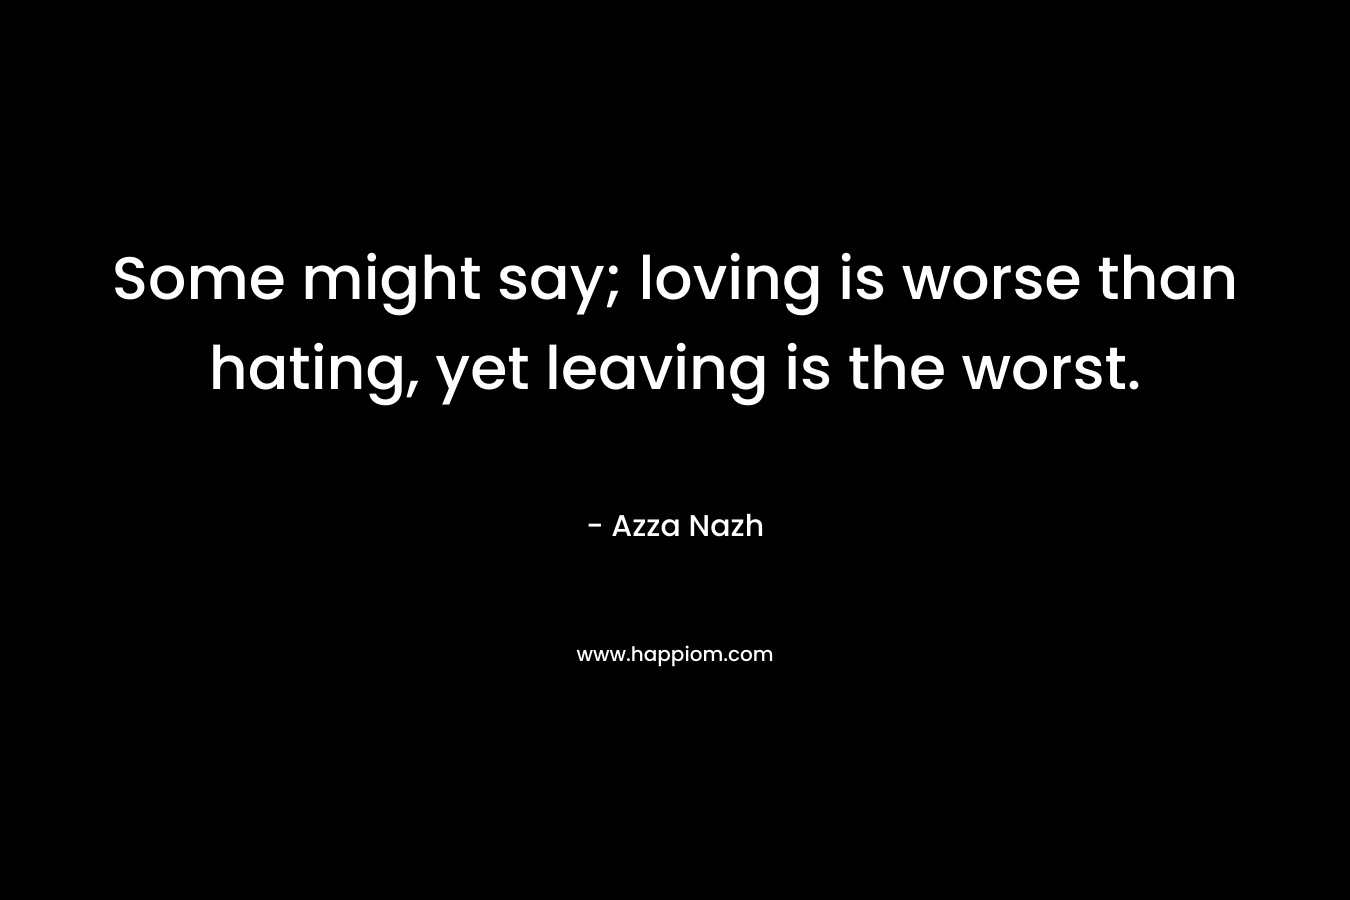 Some might say; loving is worse than hating, yet leaving is the worst.